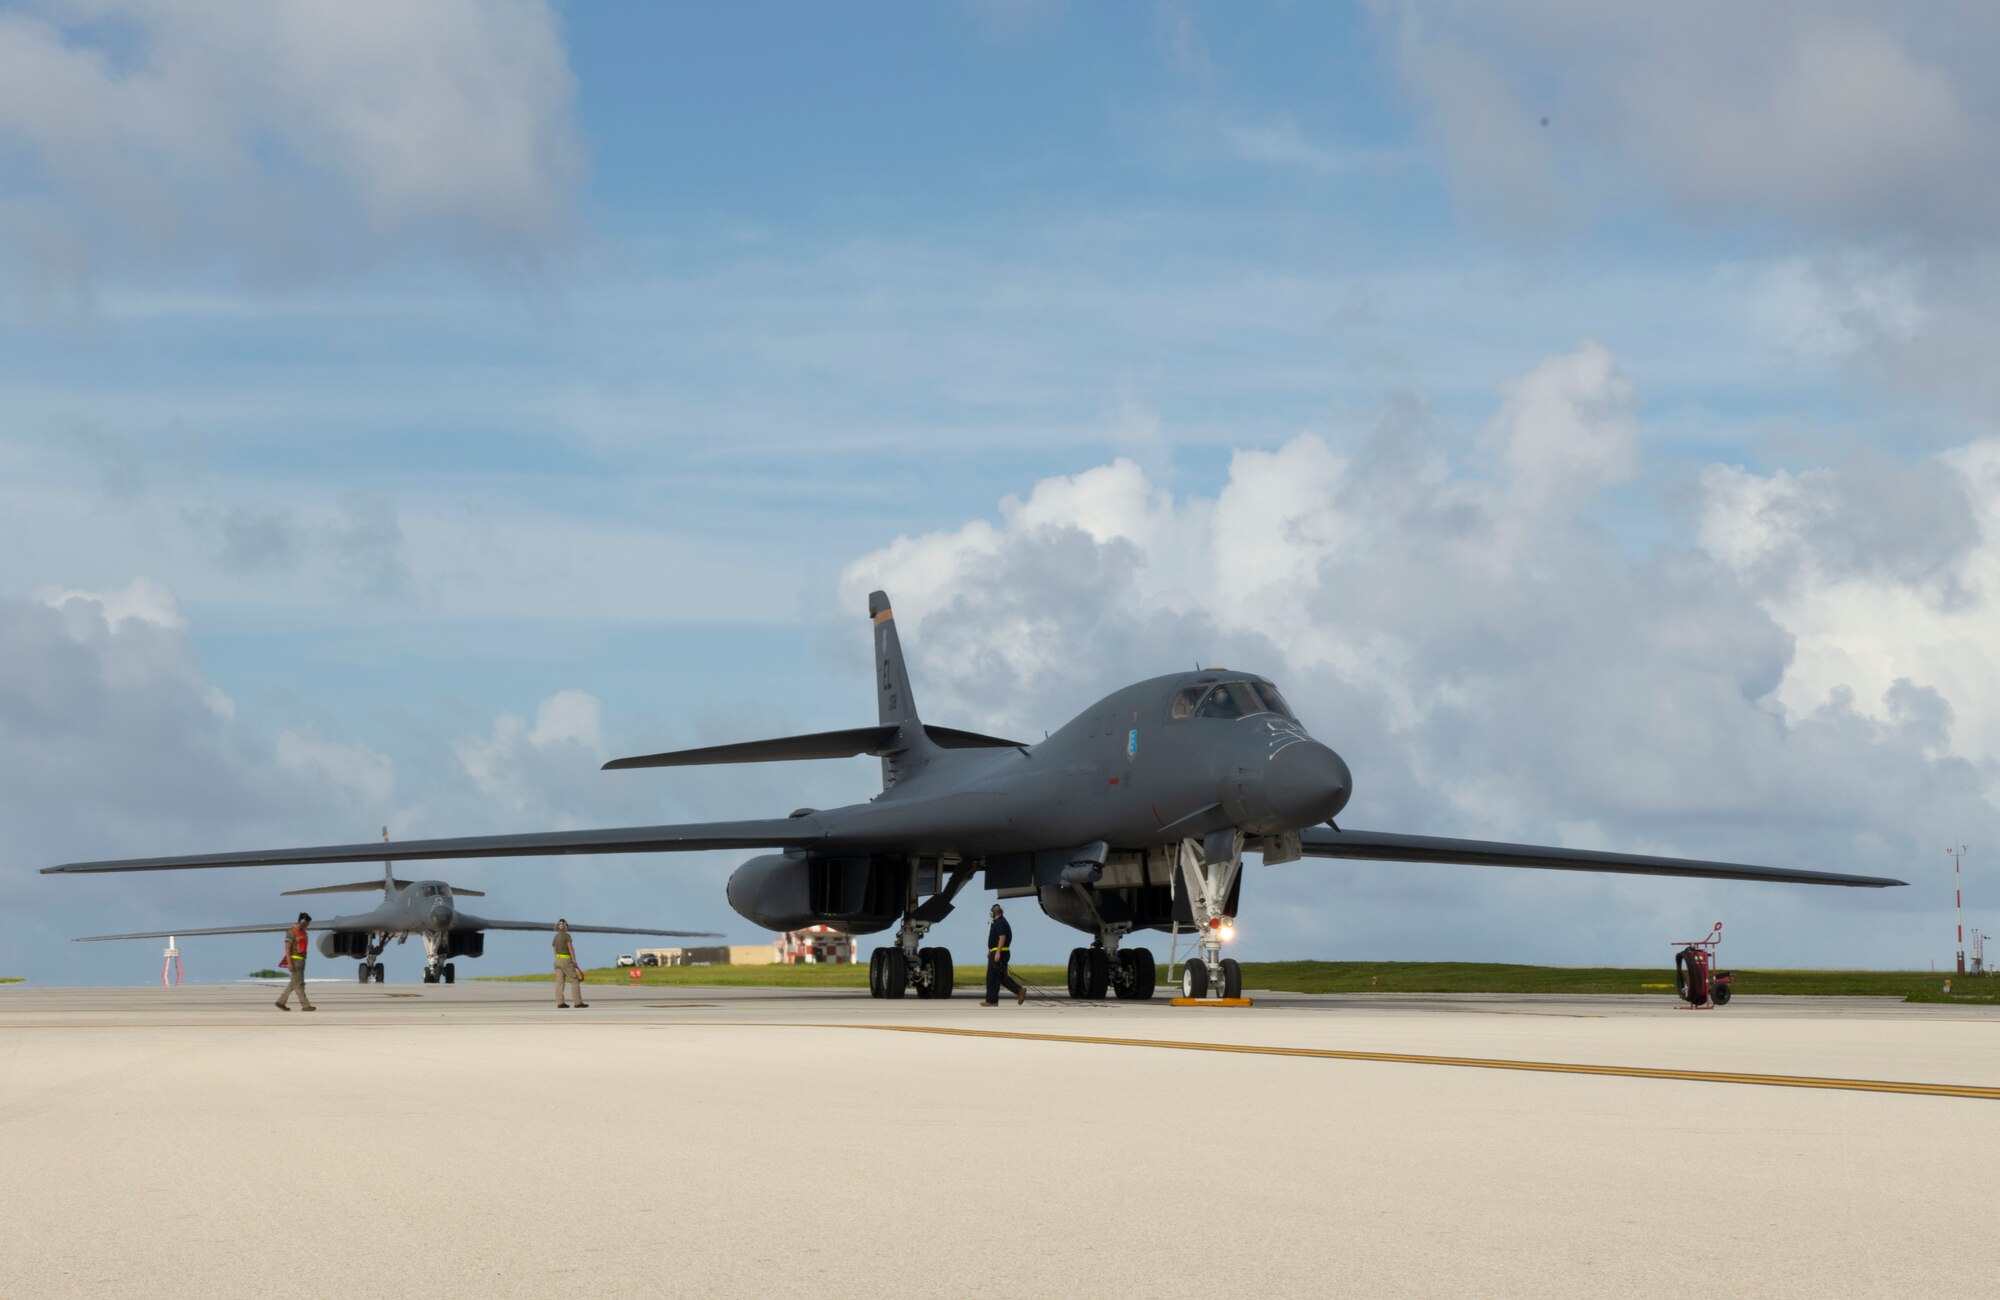 Two B-1B Lancers, assigned to the 28th Bomb Wing, Ellsworth Air Force Base, S.D., arrive at Andersen Air Force Base, Guam, as part of a Bomber Task Force deployment, July 17, 2020. Approximately 170 Airmen and two B-1s deployed to the Indo-Pacific in support of the BTF.(U.S. Air Force Photo by Airman 1st Class Christina Bennett)